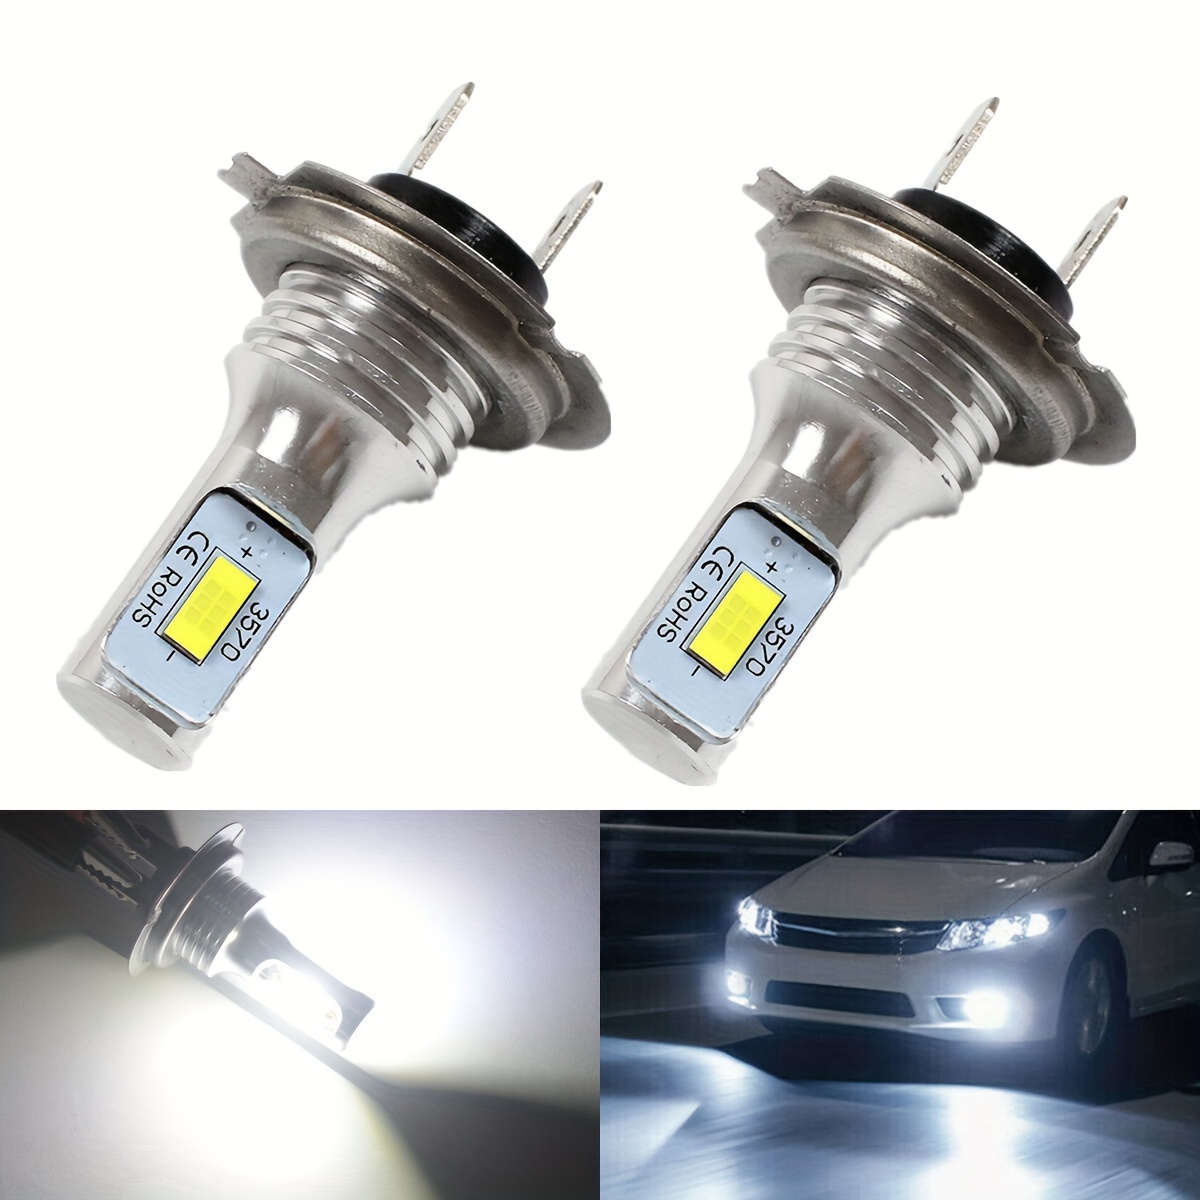 

2pcs H7 Led Car Headlight Bulbs High Low Beam 6000k White, 50w 3000lm, Perfect For Front Fog Lights Driving Lamps!